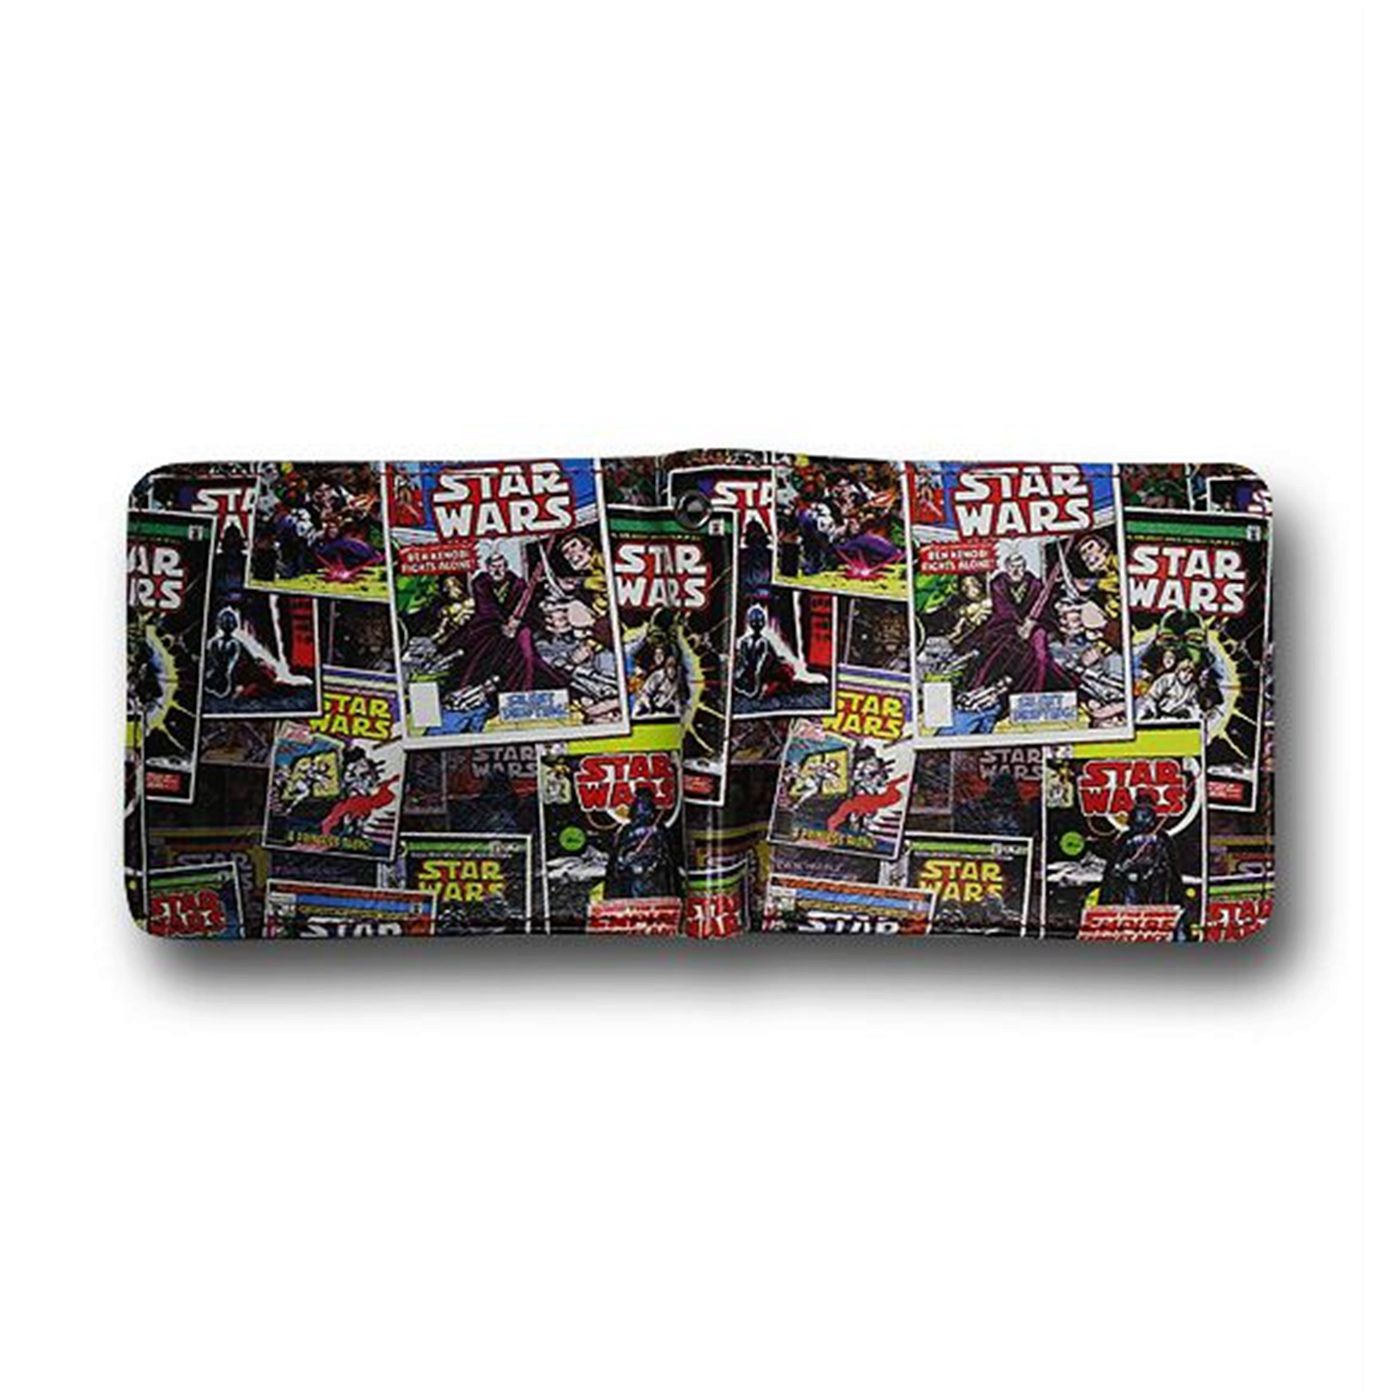 Star Wars Comic Book Covers PVC Wallet